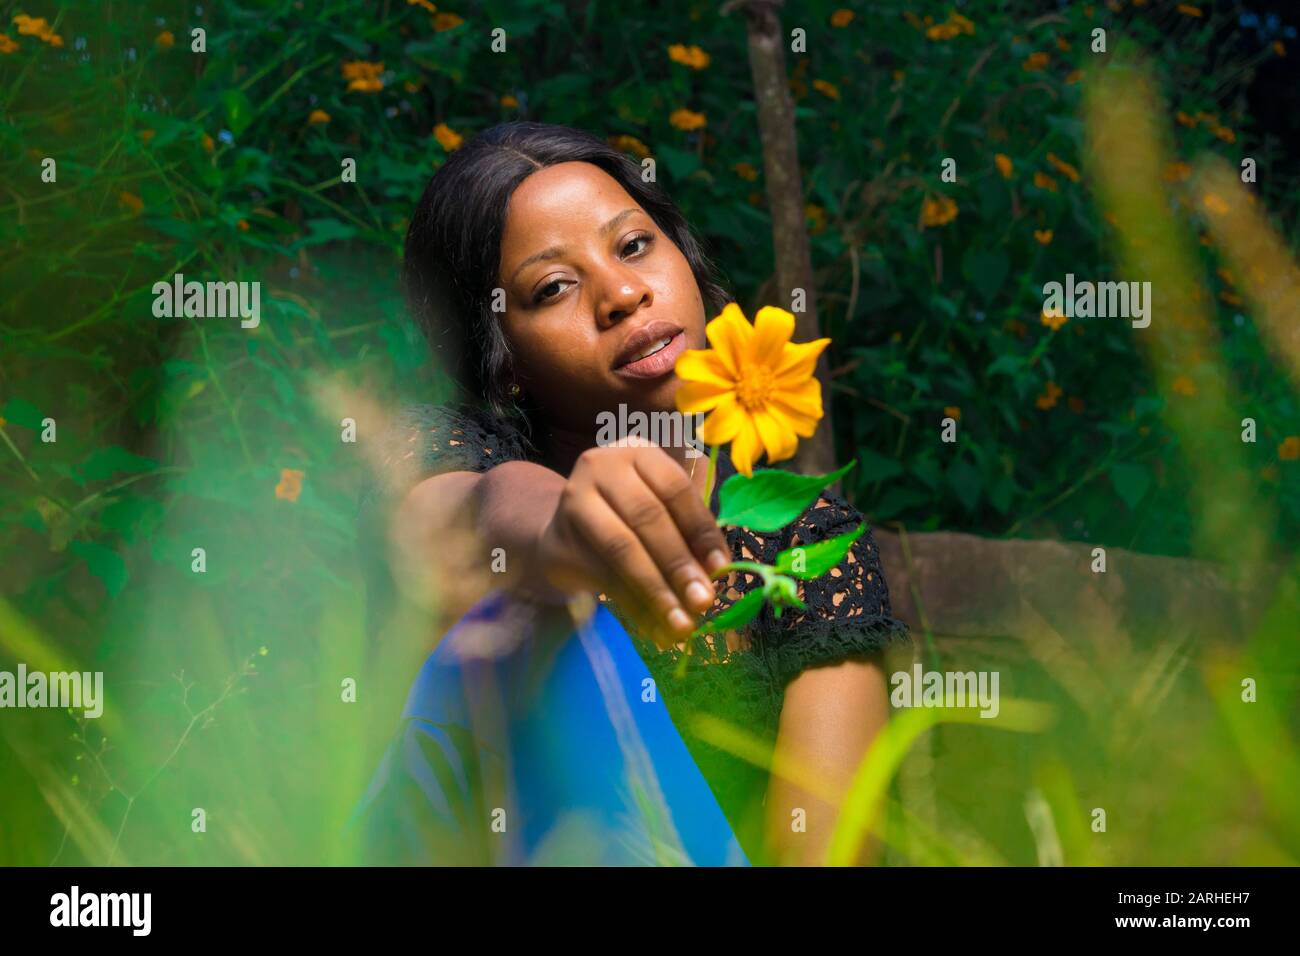 black girl holding a tree marigold sunflower sitting in a garden alone Stock Photo